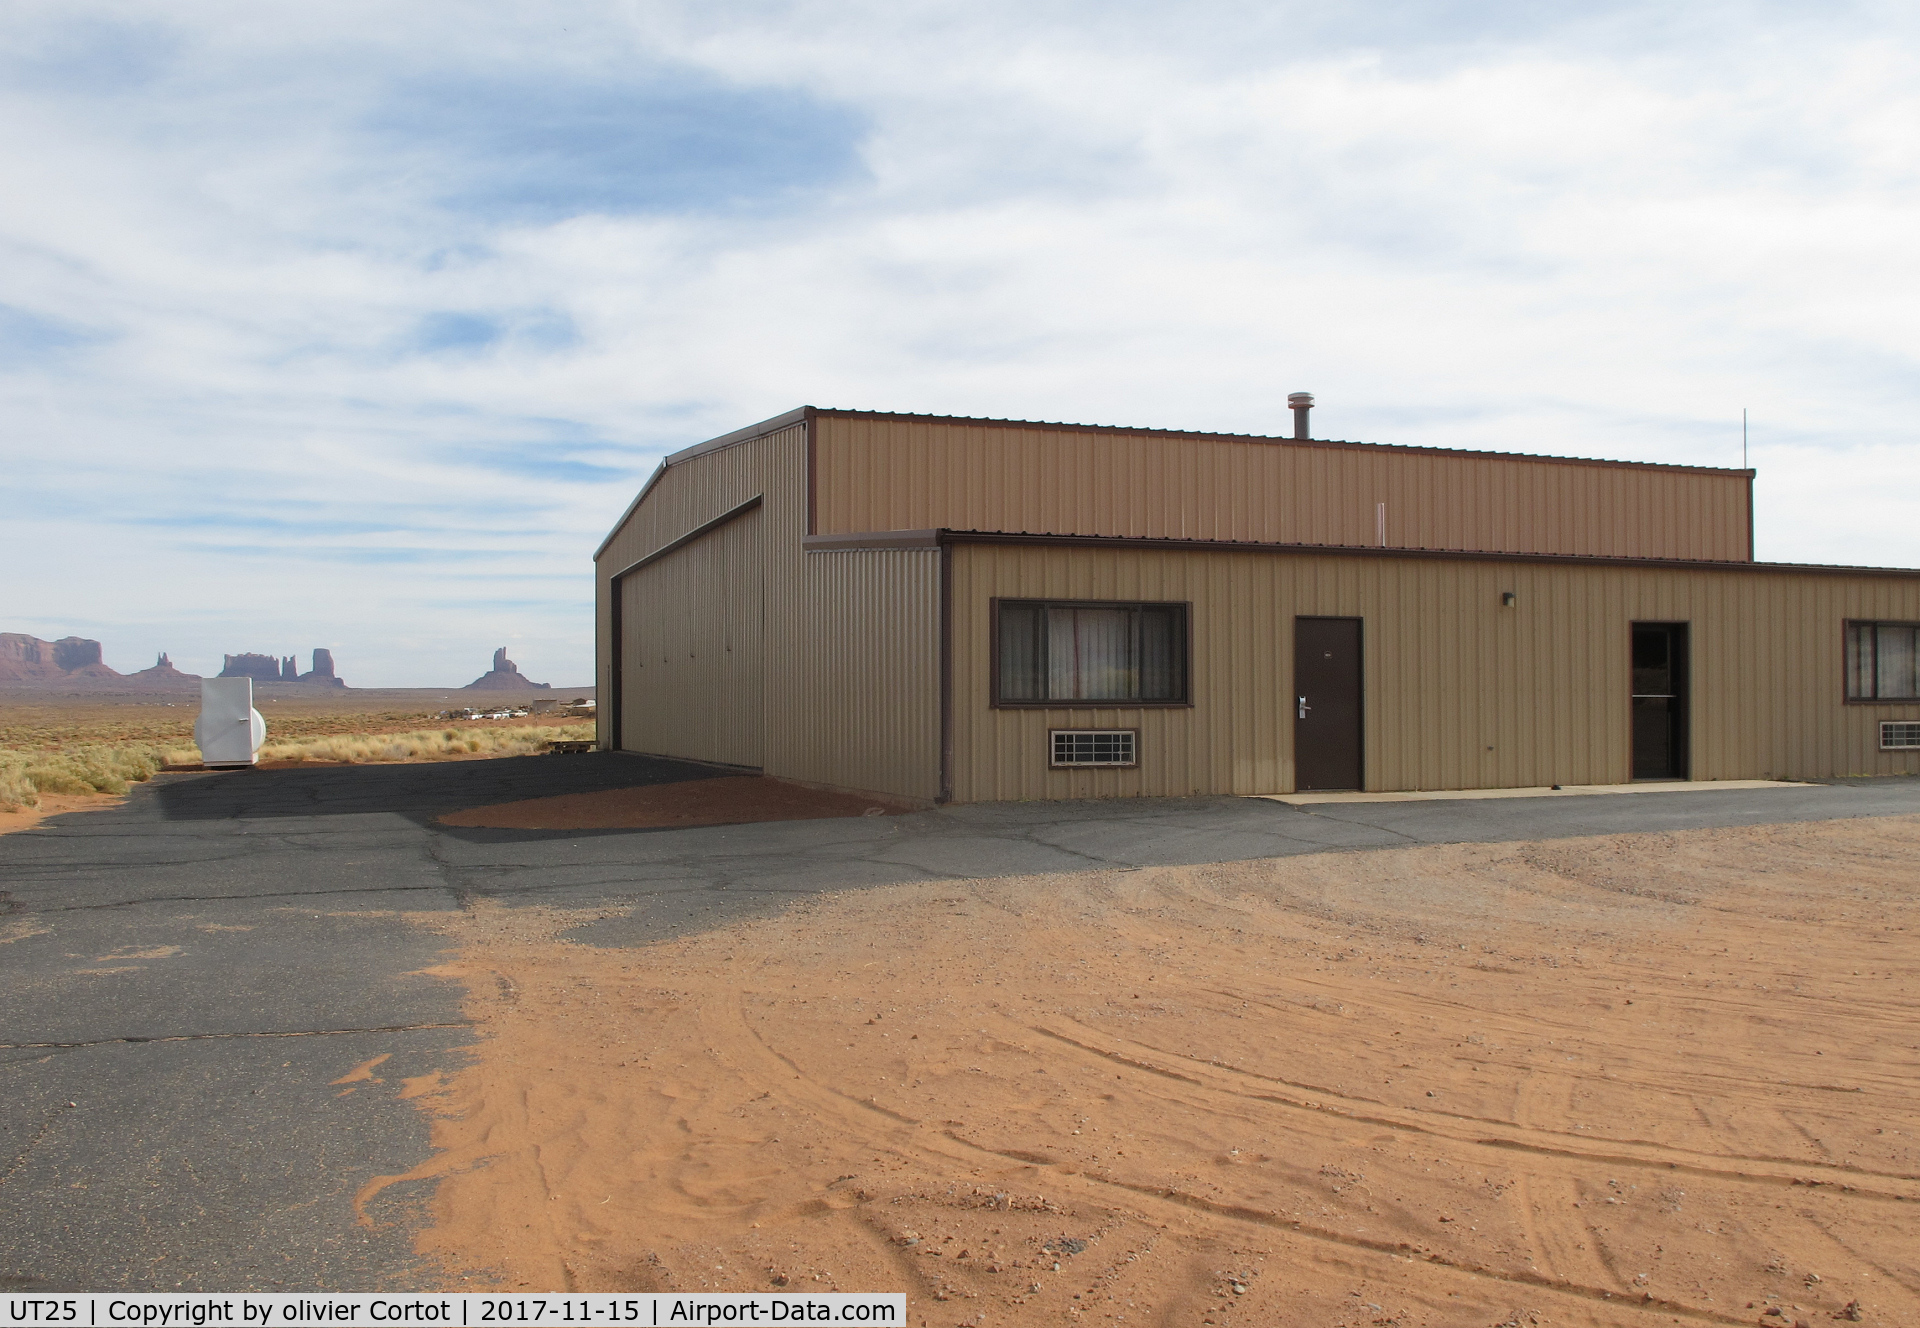 Monument Valley Airport (UT25) - the only hangar of the airfield